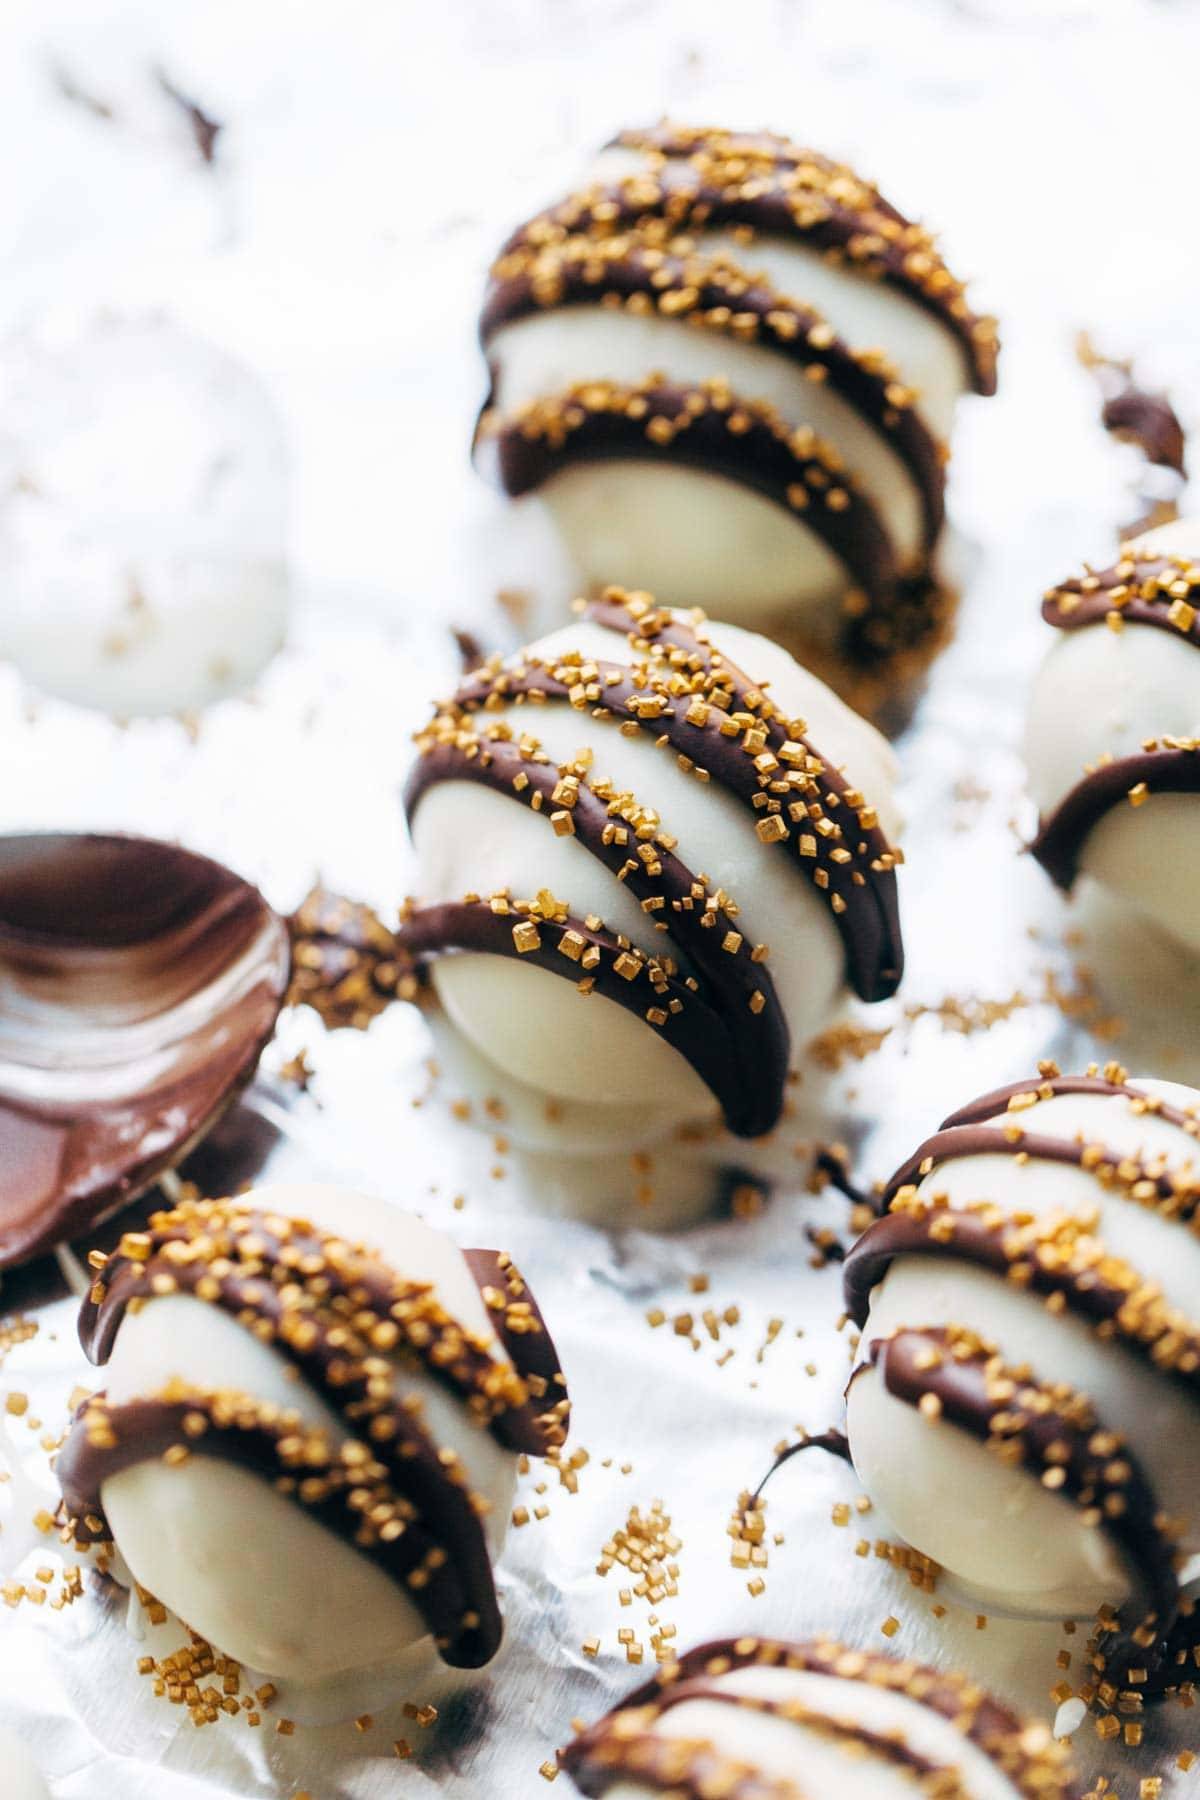 Minty Chocolate Cake Bites with chocolate drizzle and sprinkles